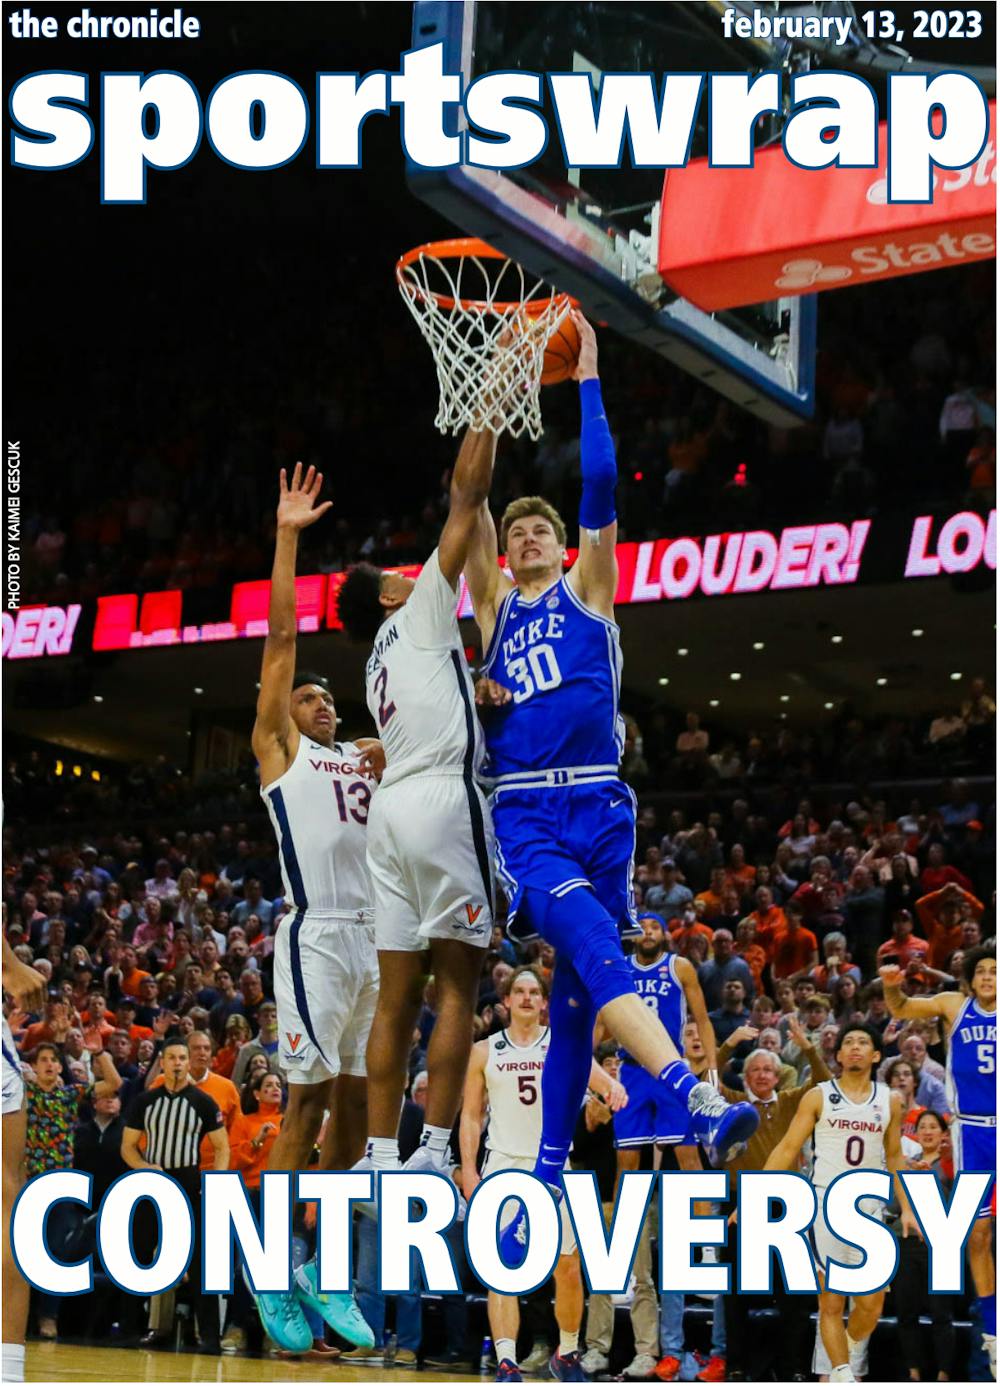 Kyle Filipowski drives to the rim on the final play of regulation in Duke men's basketball's overtime loss at Virginia. The ACC later released a statement, admitting an officiating error on the play.